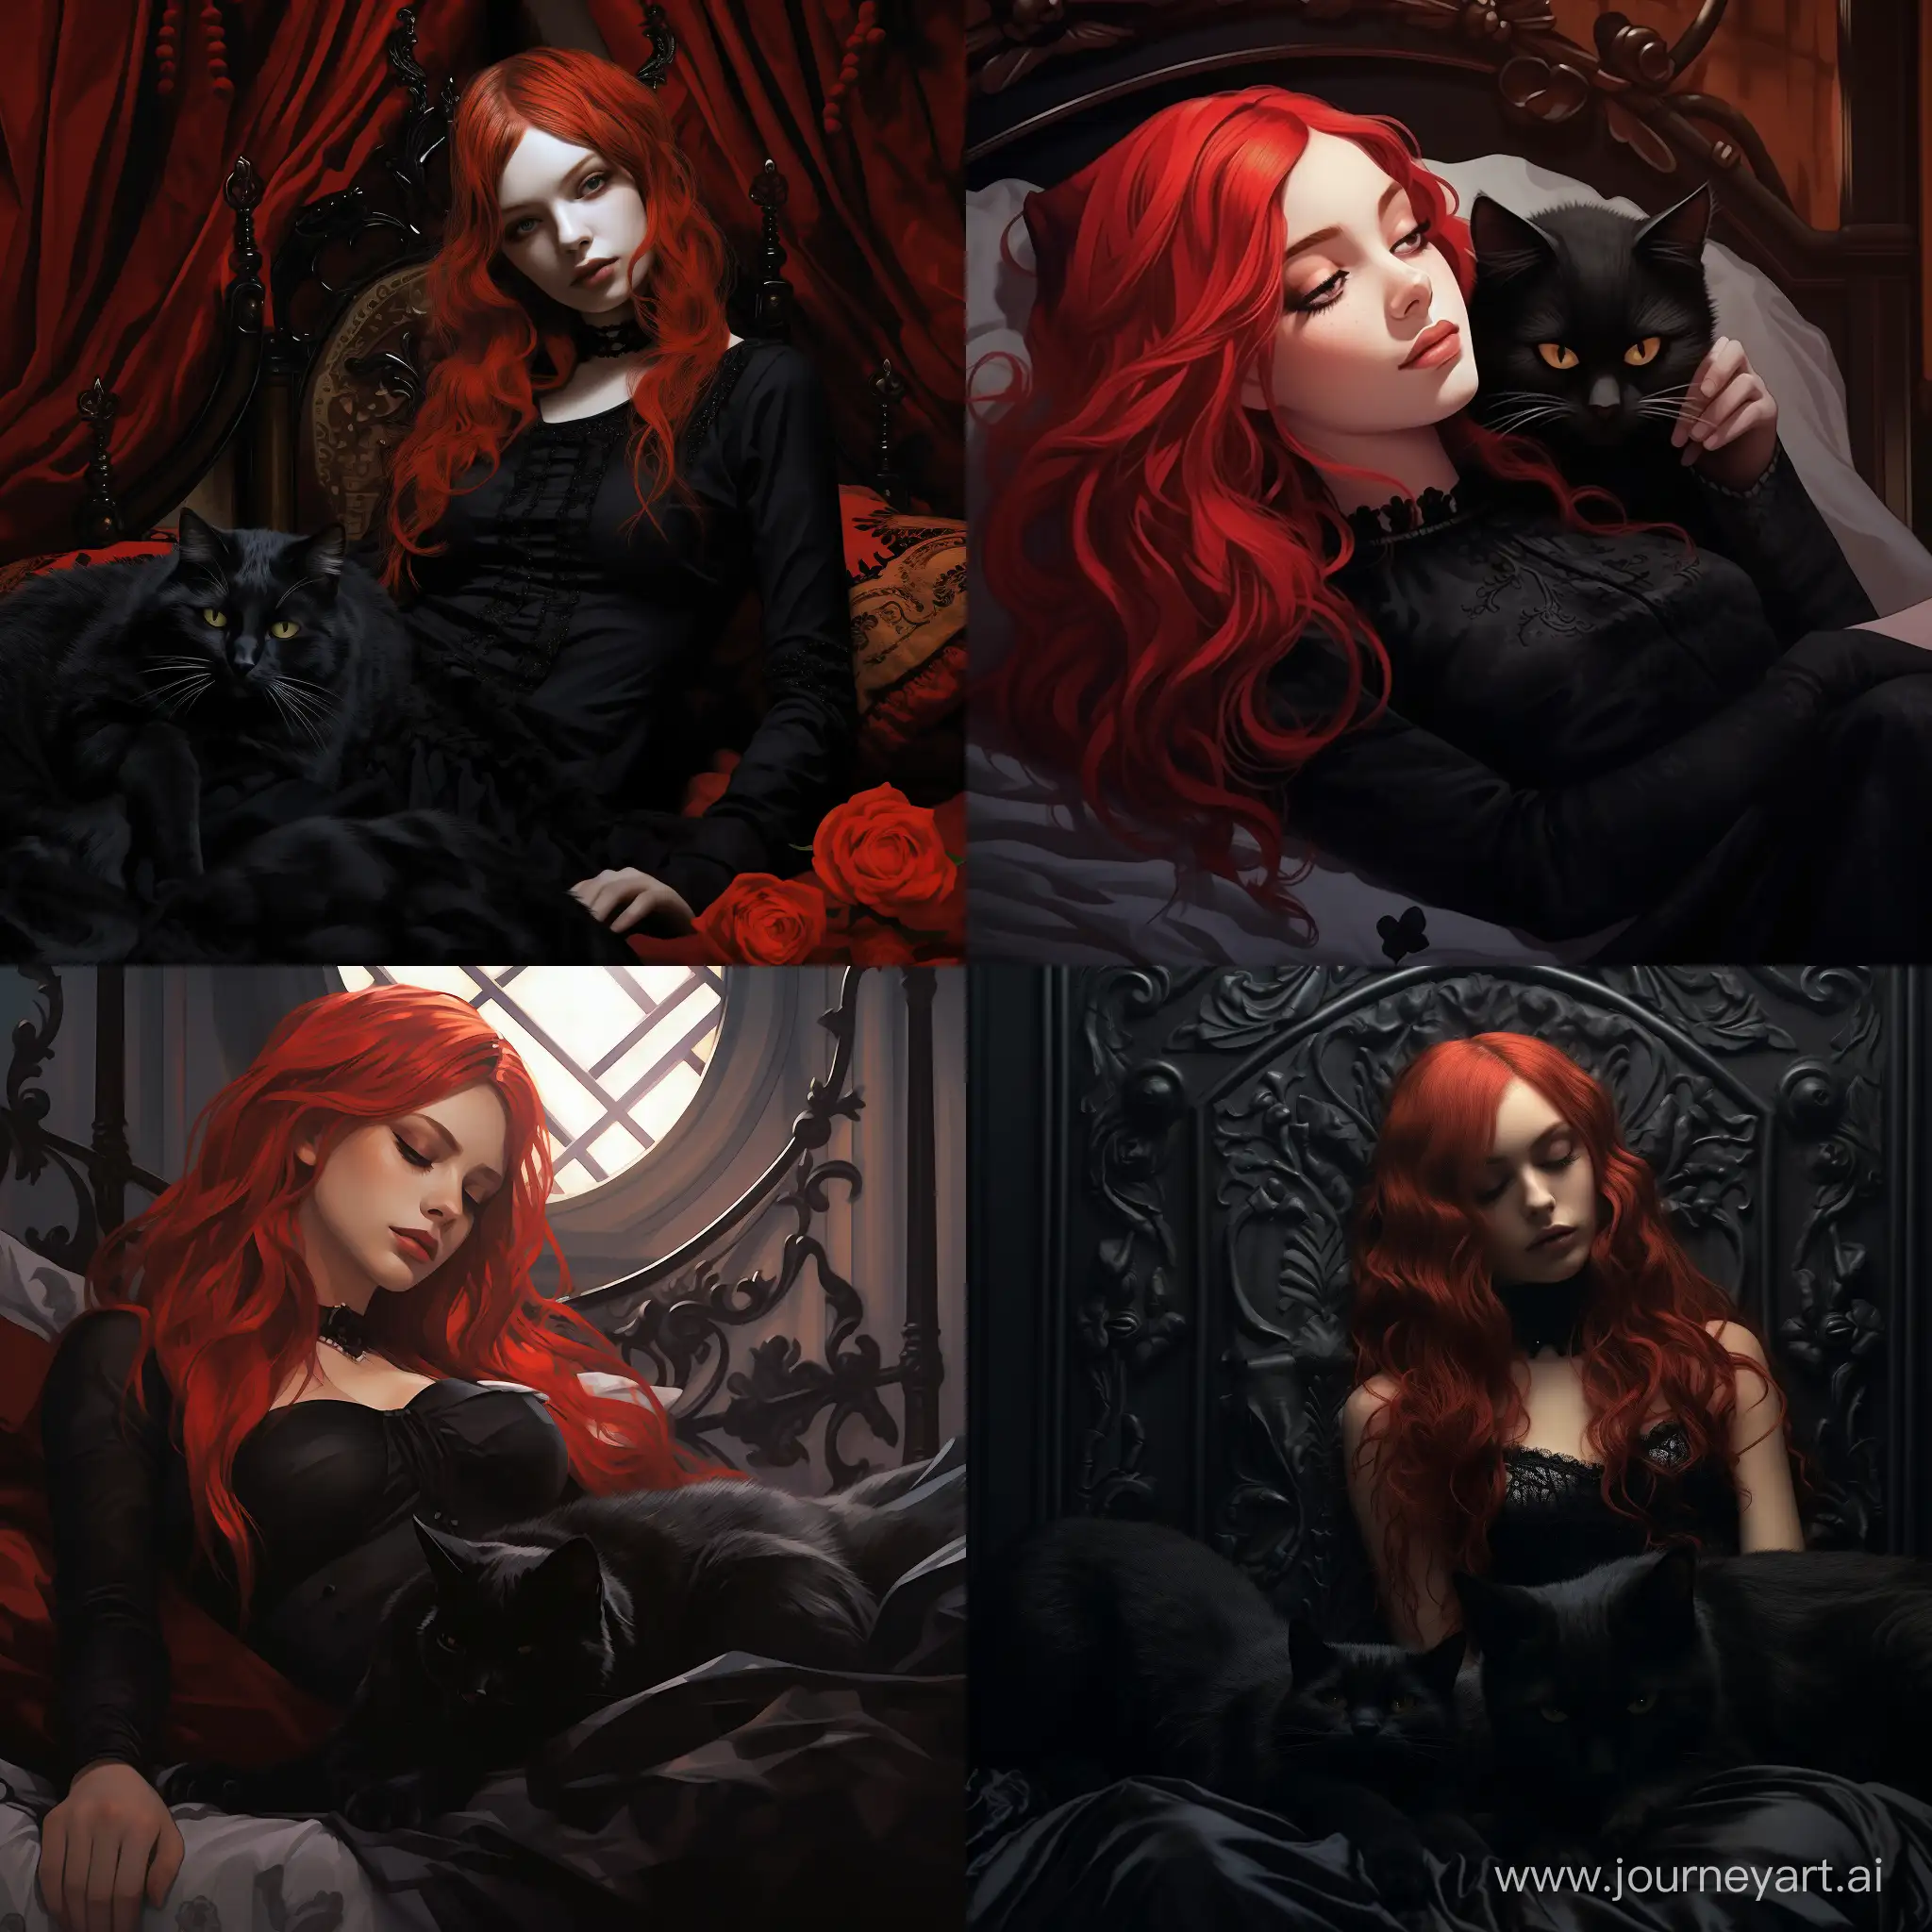 Enchanting-RedHaired-Gothic-Girl-Sleeping-Next-to-a-Stylish-Gothic-Cat